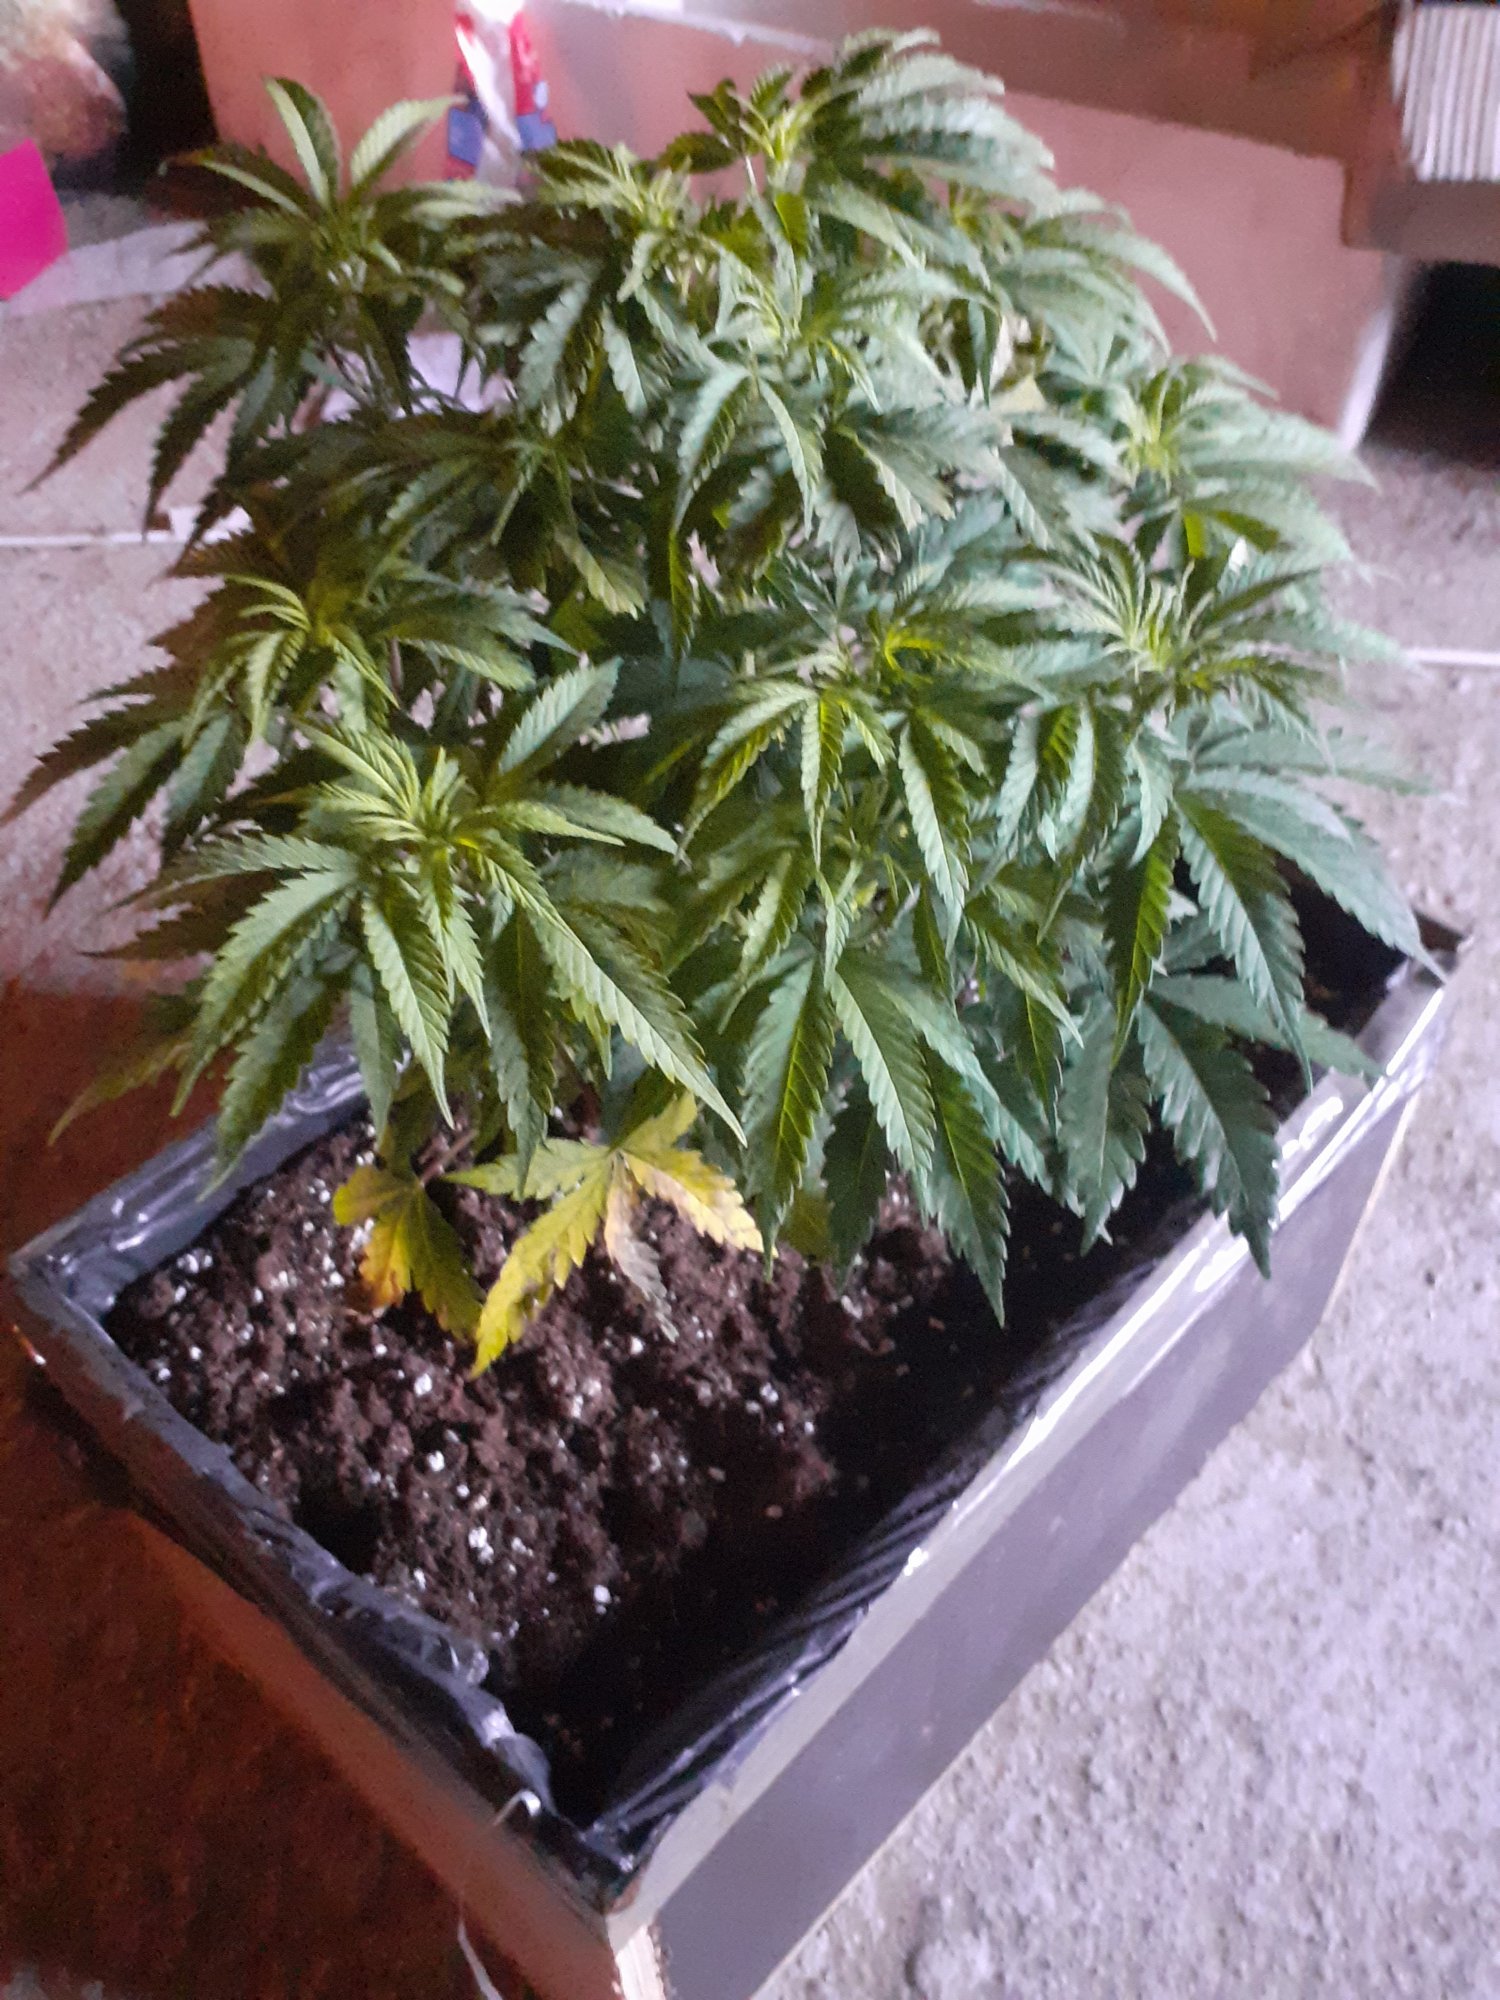 Help what deficiency is this 7